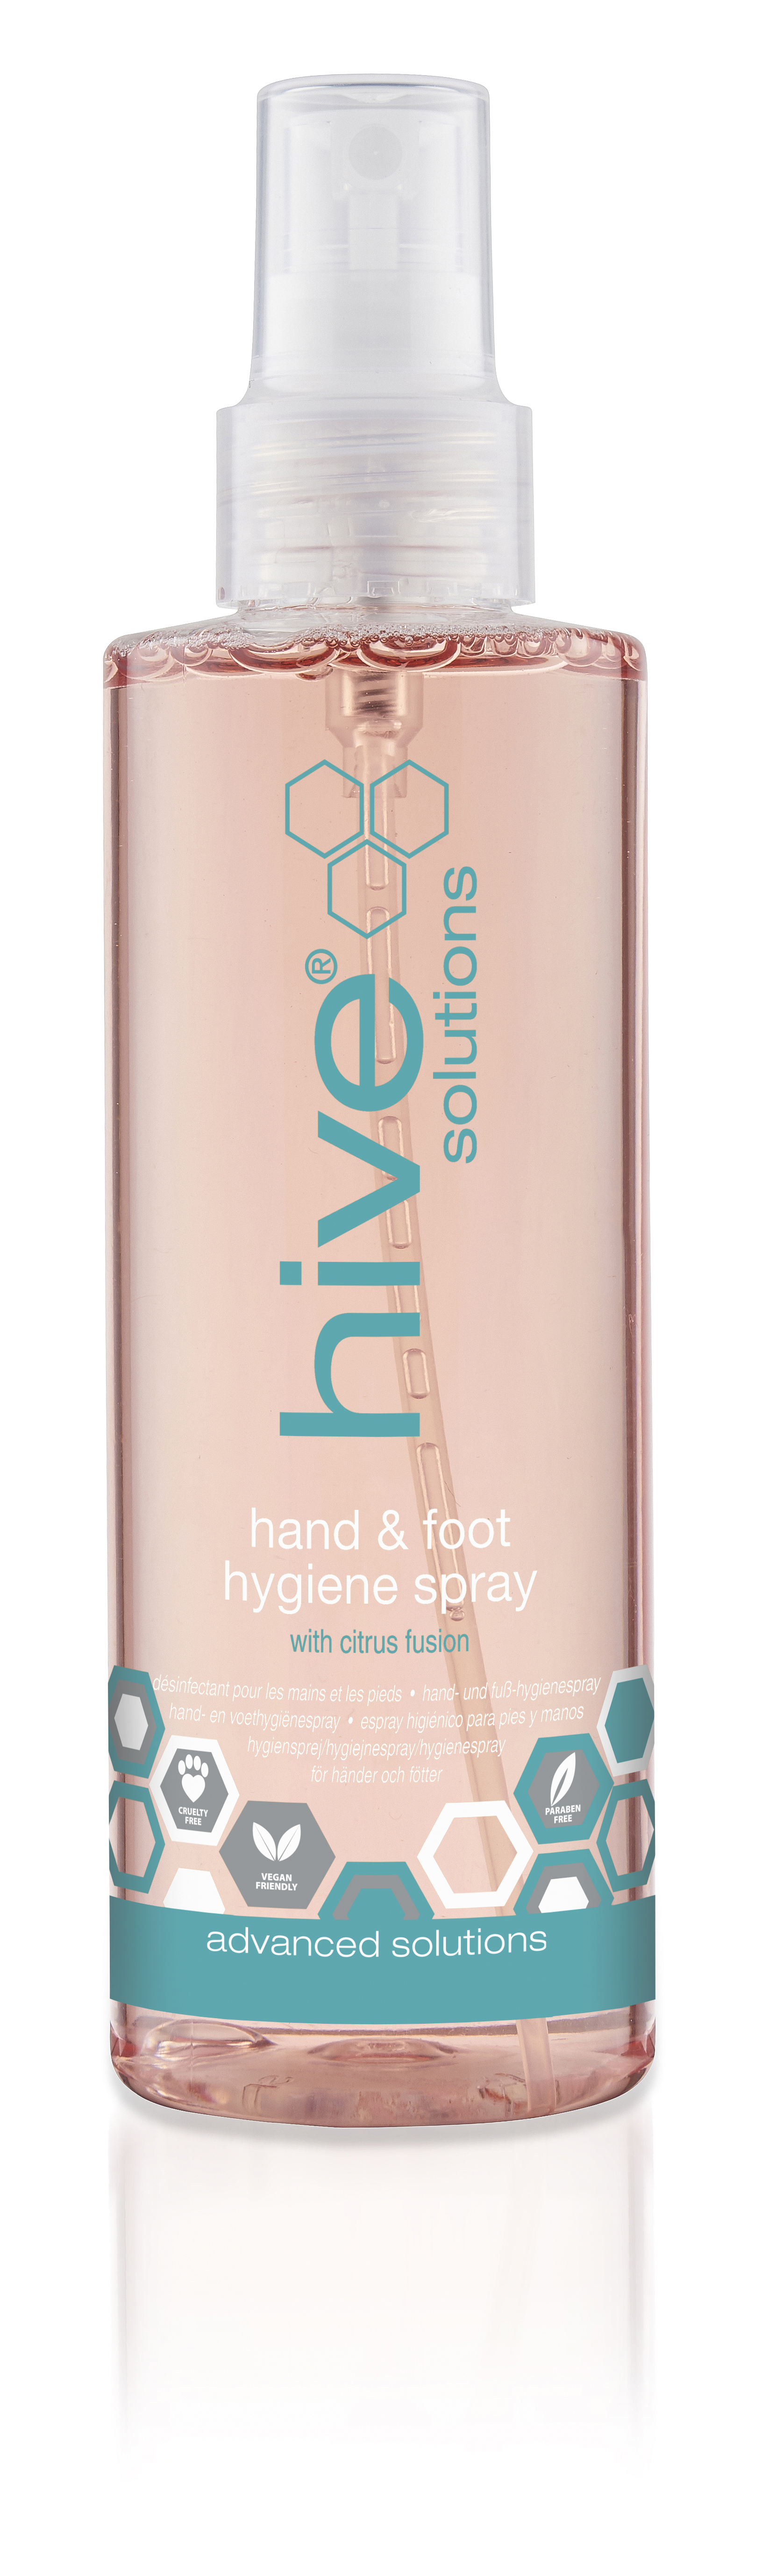 Hive Hand and Foot Hygiene Spray